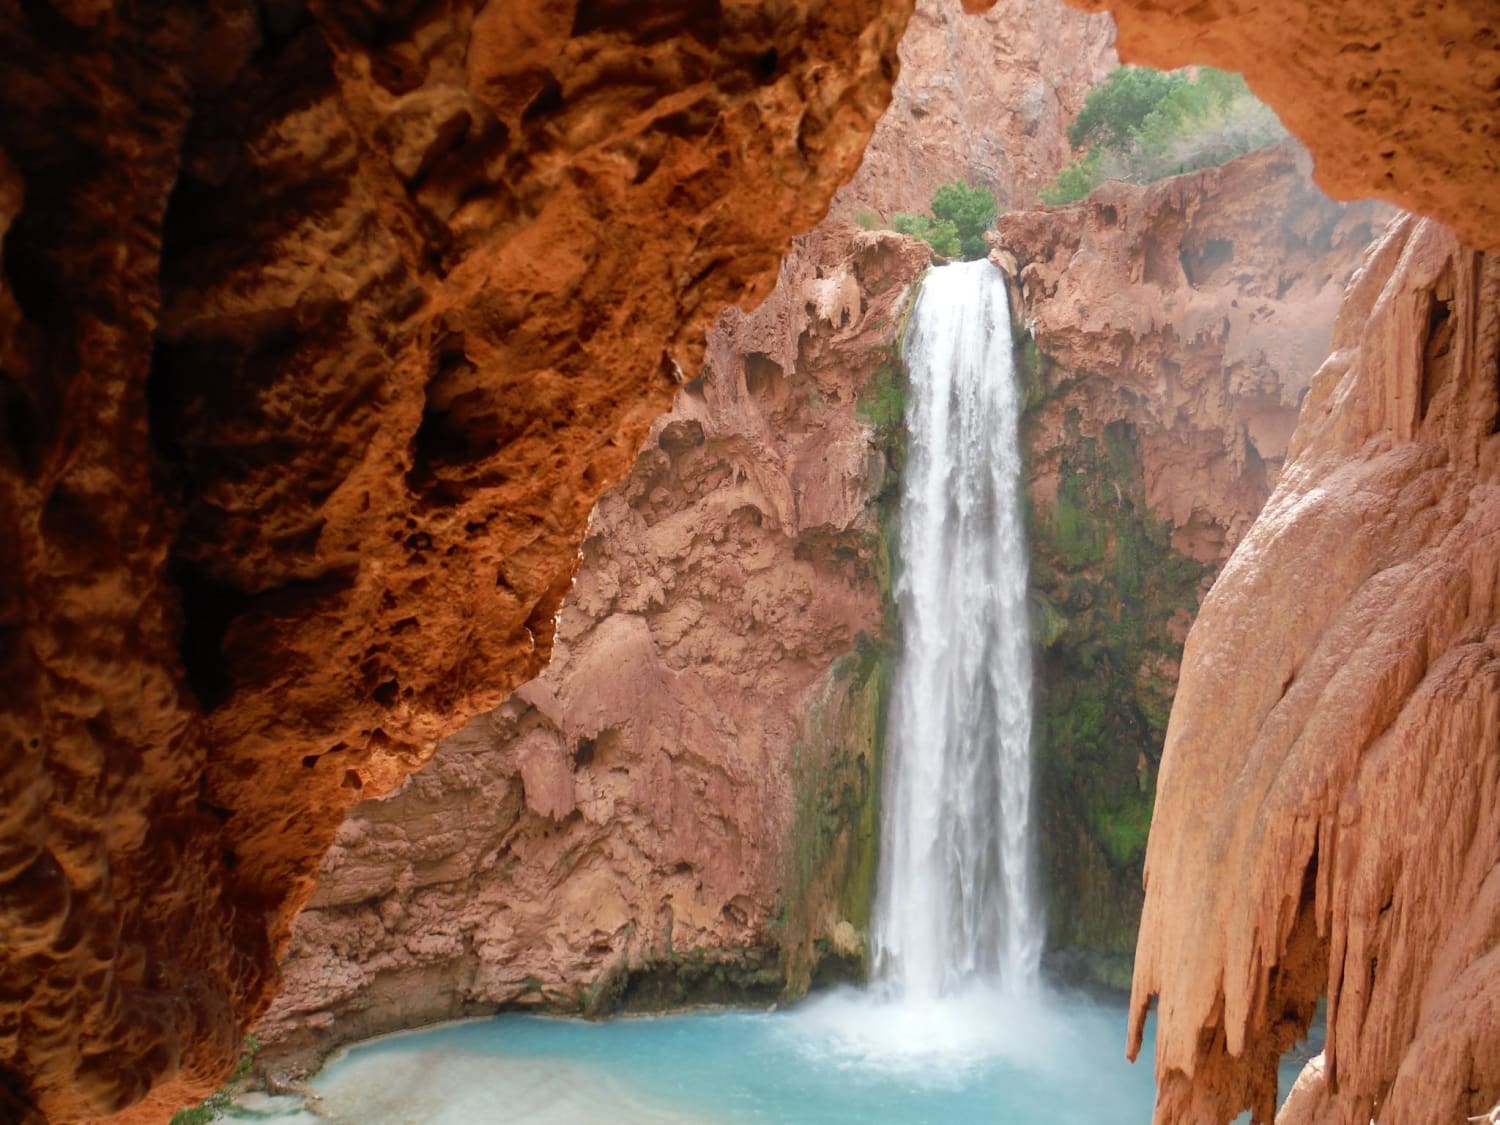 Nature’s window for an A+ view of Mooney Falls in the Grand Canyon, AZ